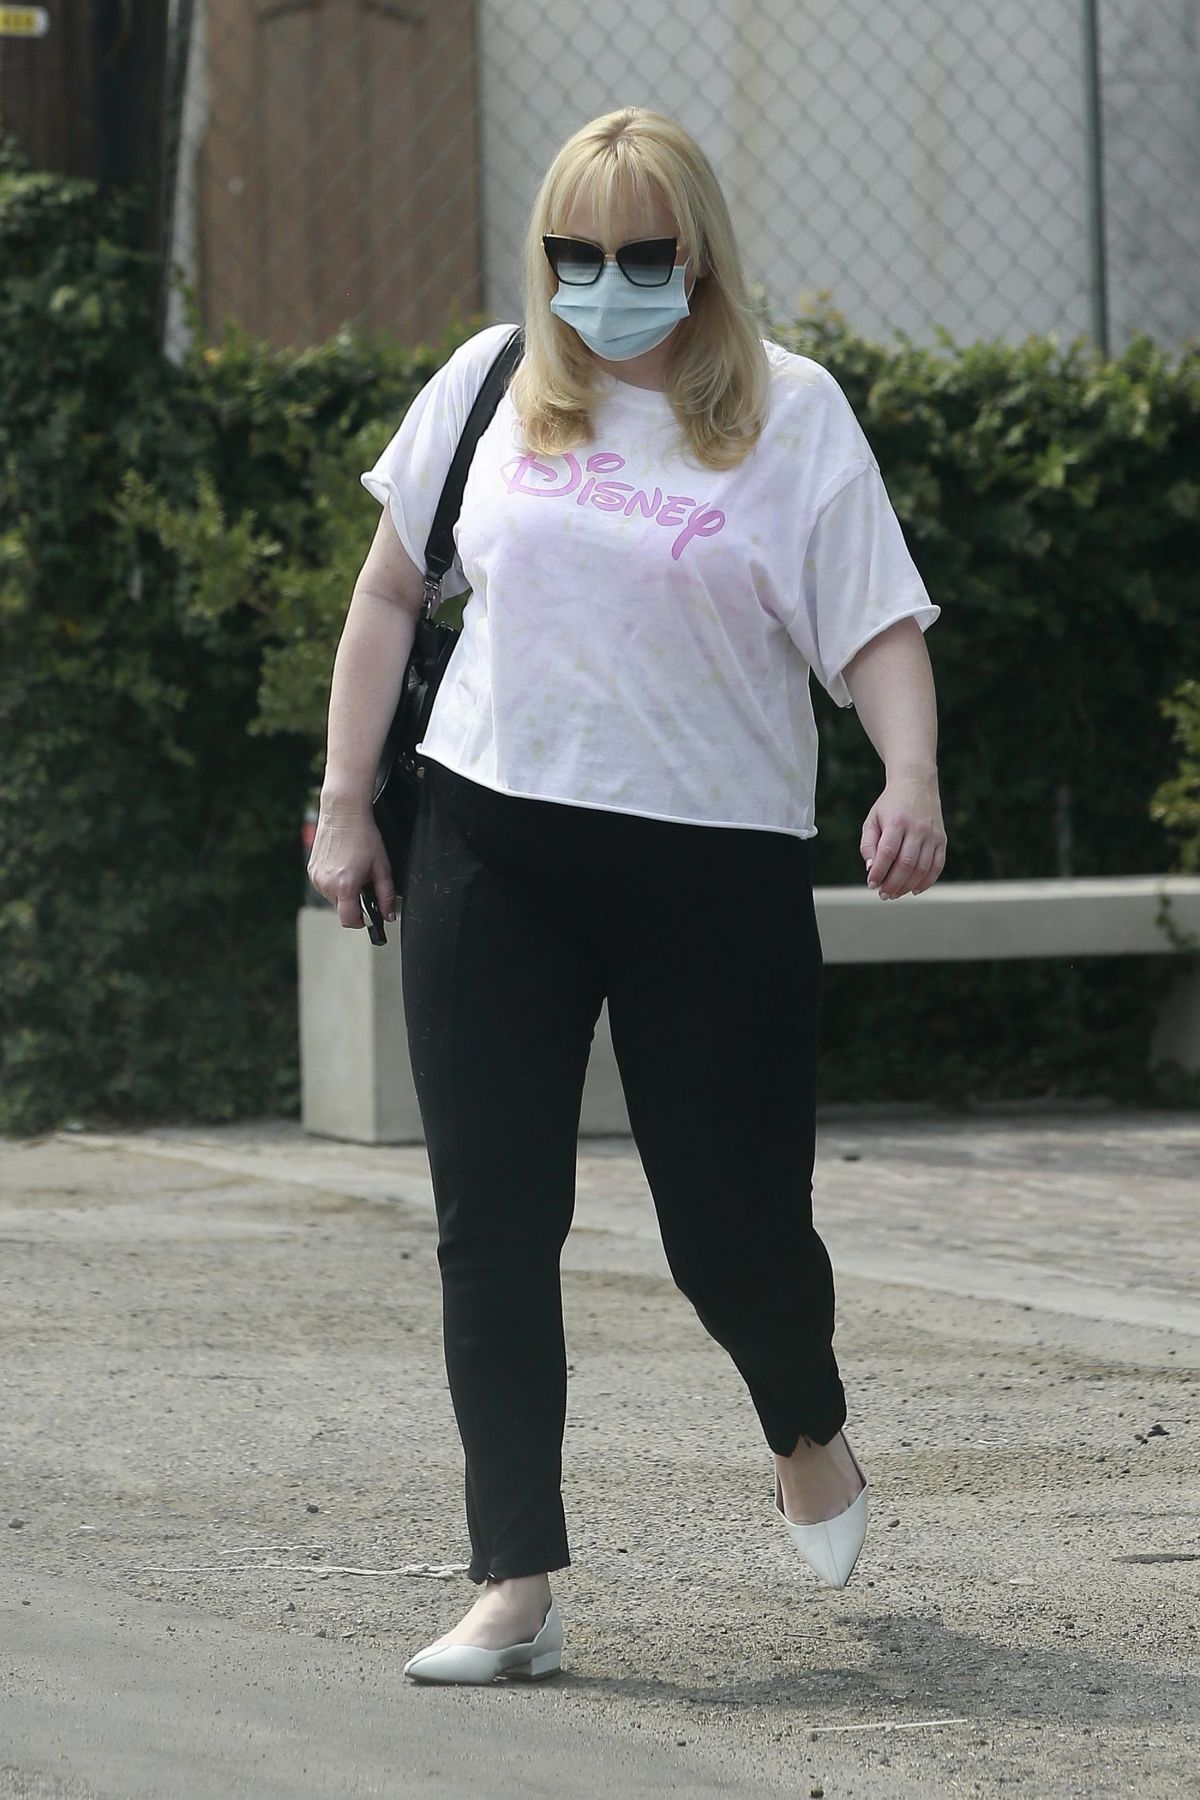 REBEL WILSON Wearing a Mask Out in West Hollywood 08/21/2020 – HawtCelebs